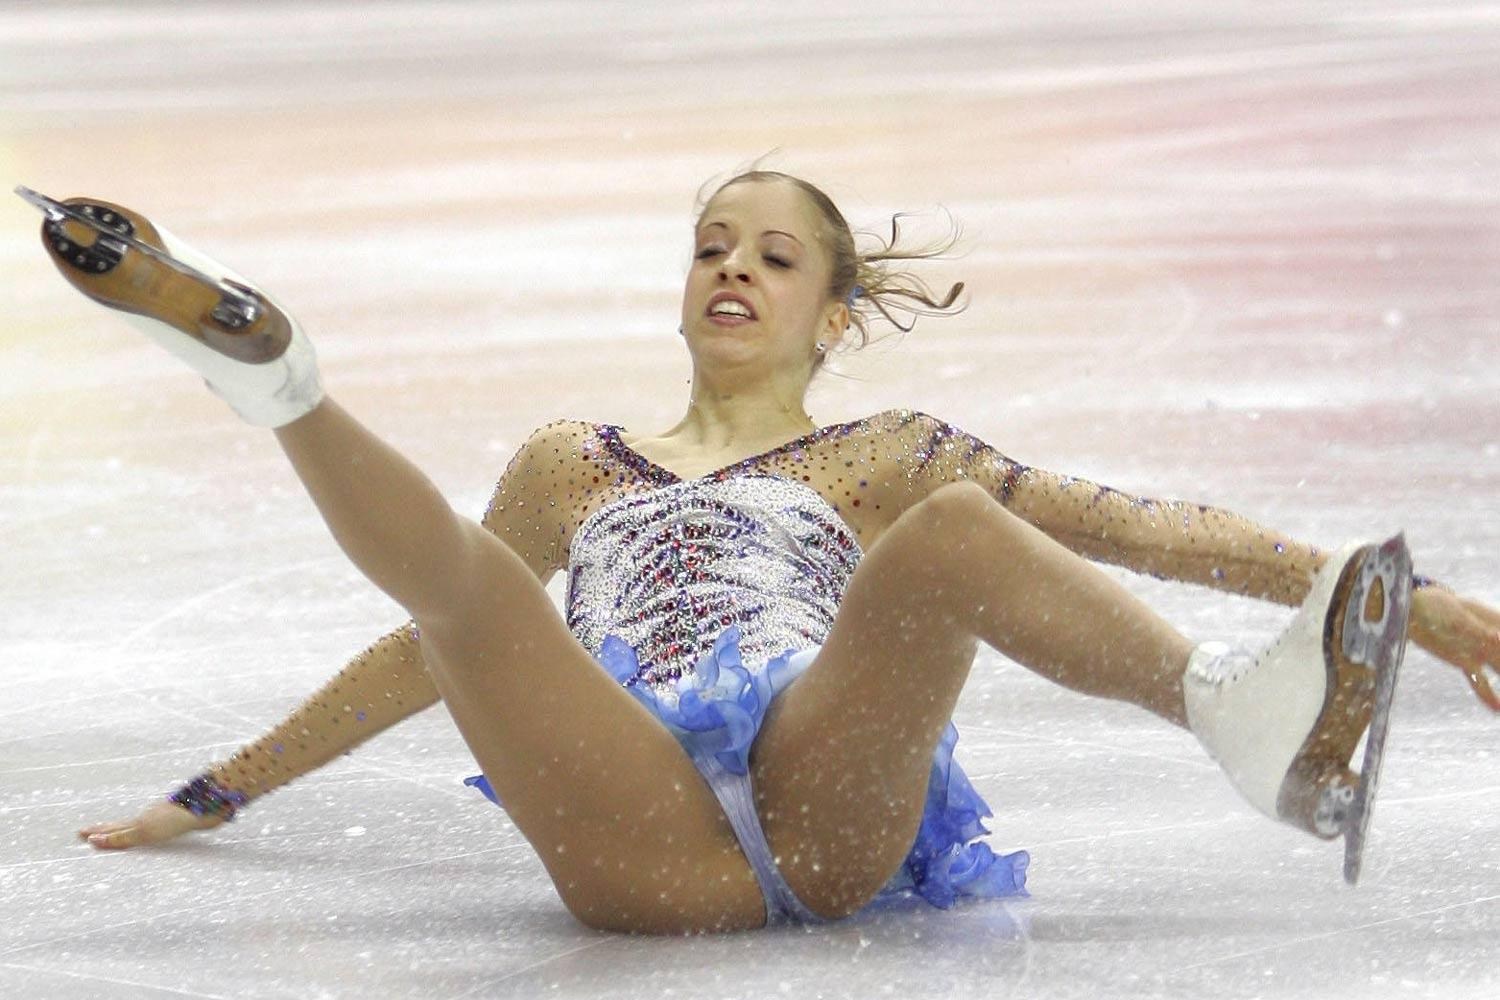 Russian Figure Skater (71 photos) picture